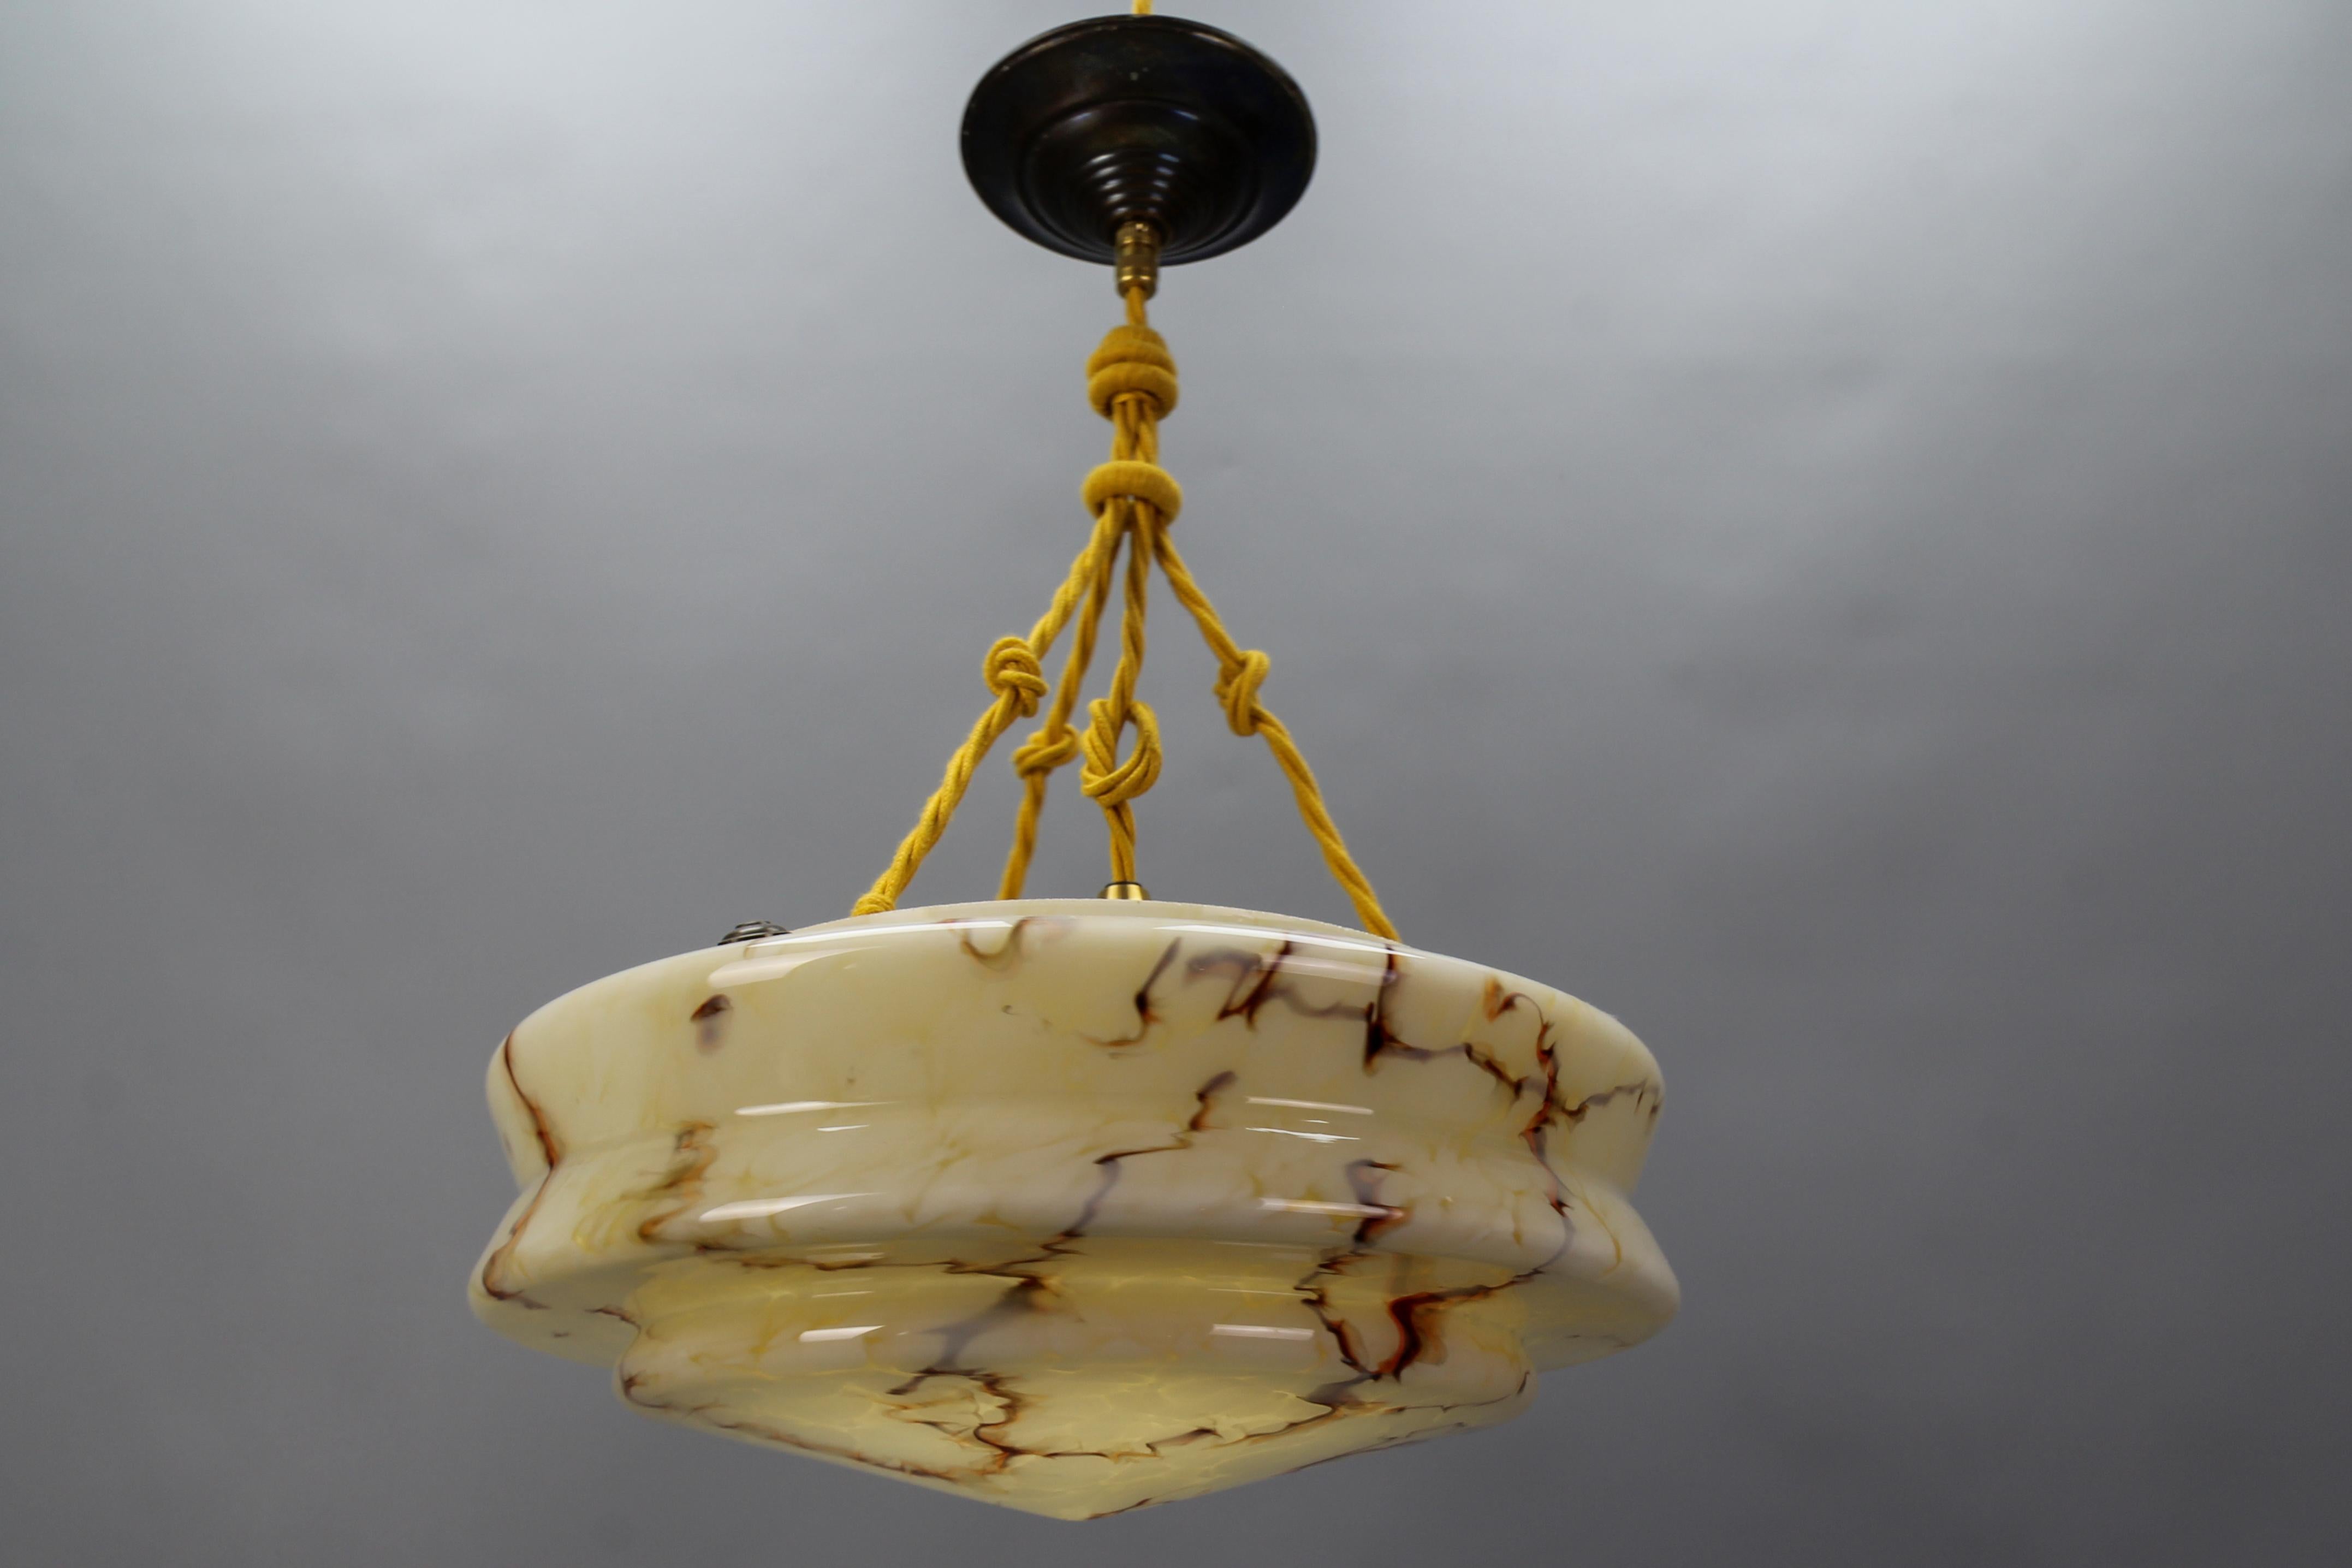 An Art Deco marbled amber color glass and brass pendant light from circa the 1930s, Germany.
This beautiful ceiling light fixture features a marbled glass lampshade - the shade blends a marbled dark yellow or amber color base with dark and light